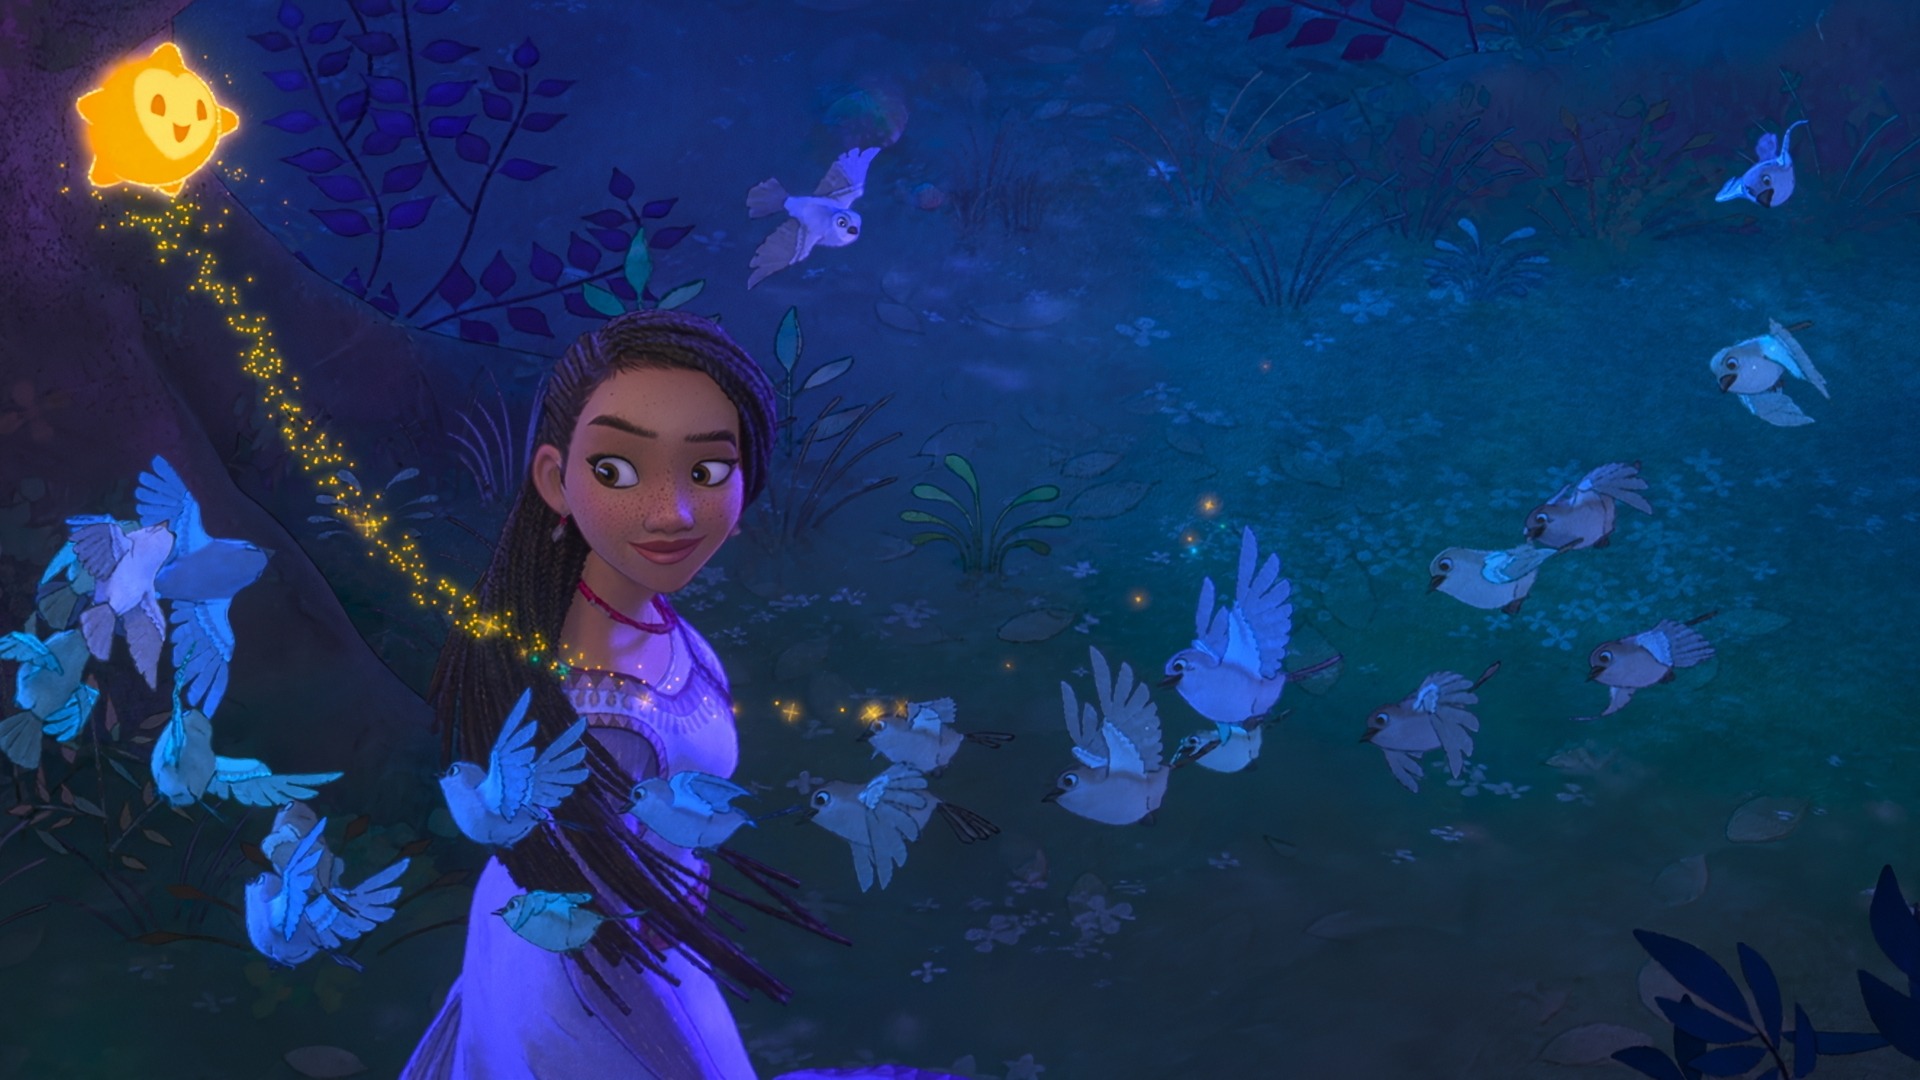 A girl surrounded by birds and magic in this image from Walt Disney Pictures.